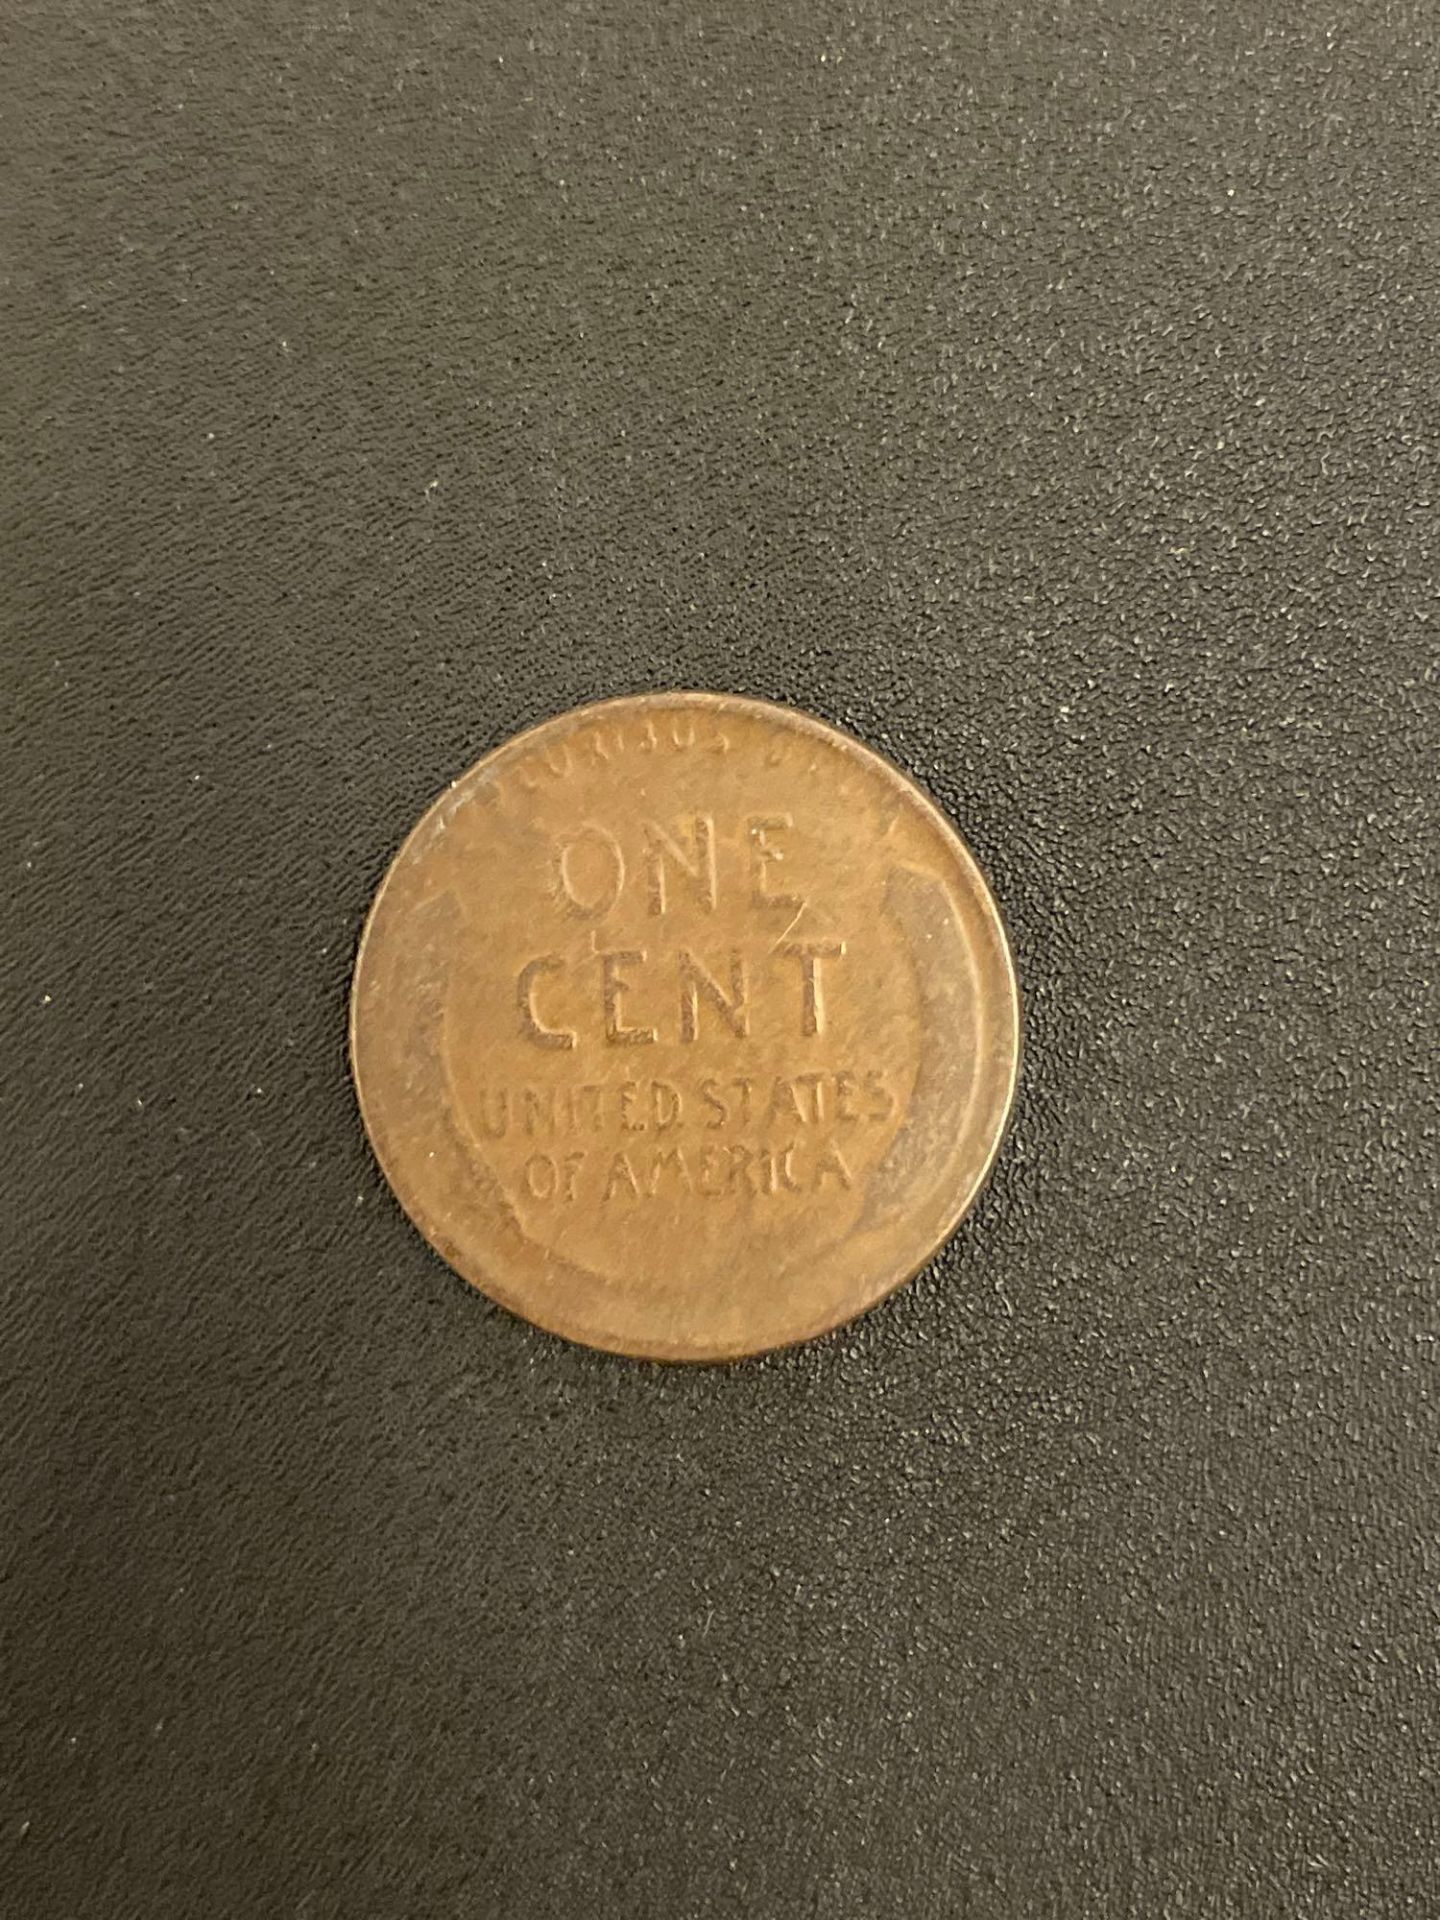 1863 Indian Cent & 1922 Wheat penny - Image 6 of 7